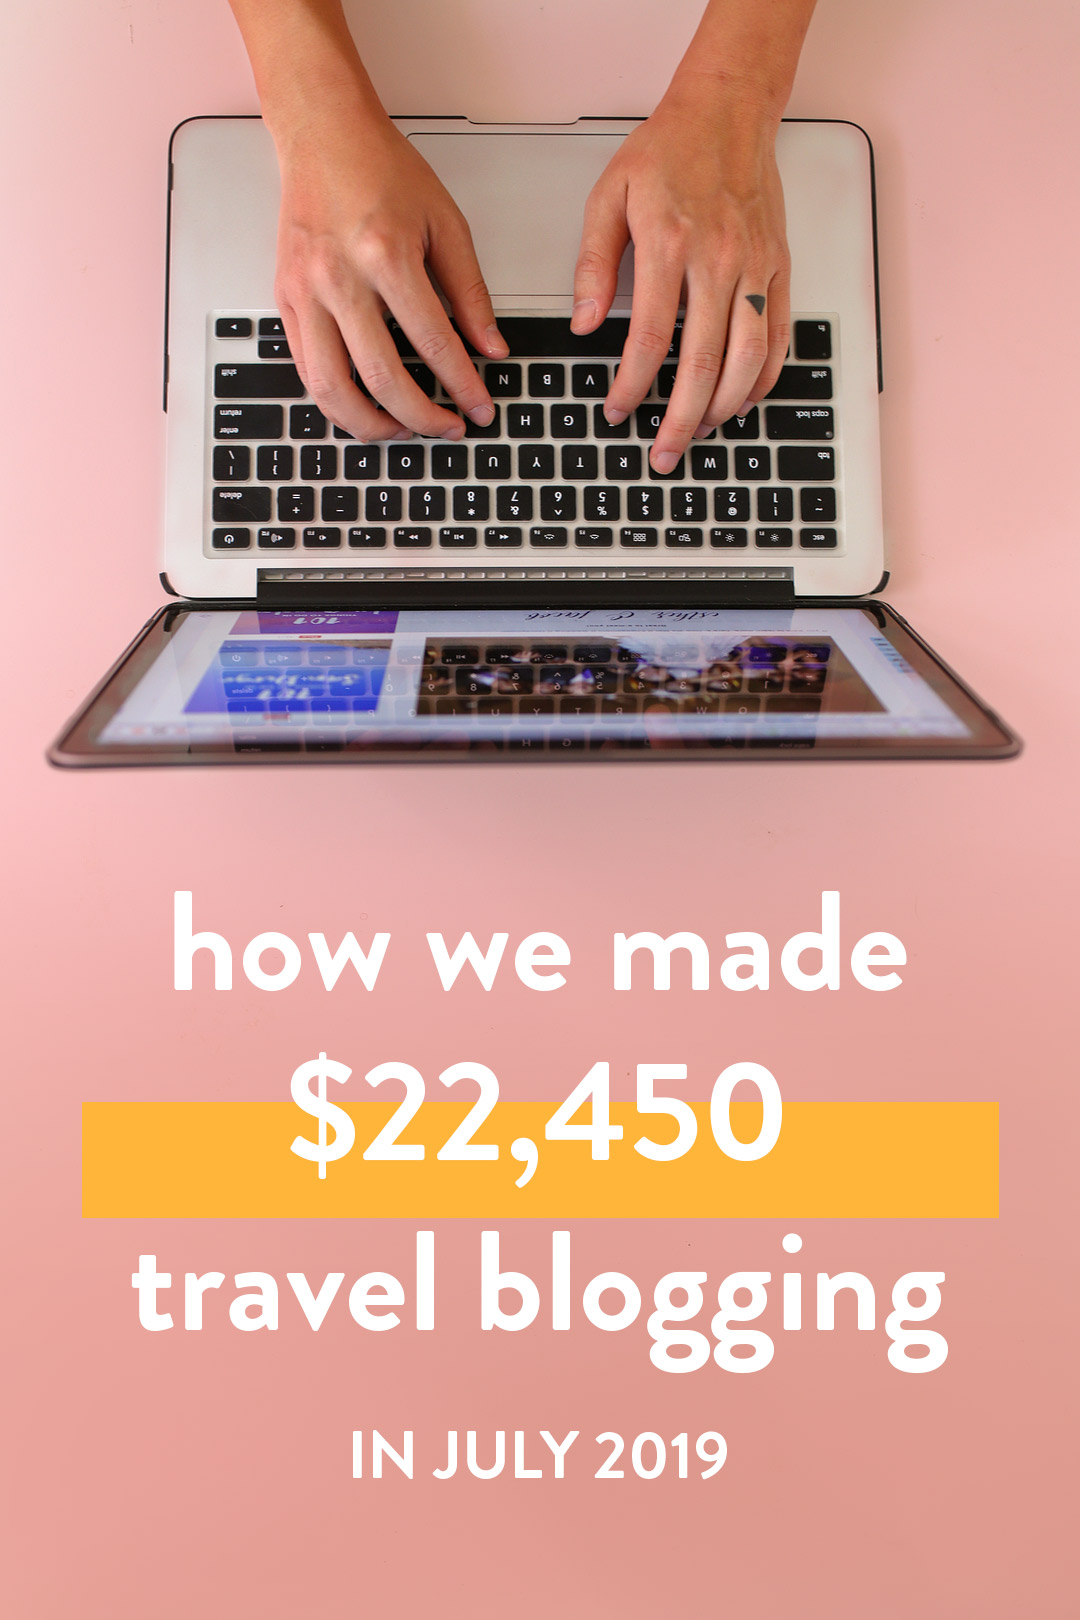 Blog Income Report - How We Made Over $22.4K on the Travel Blog in July